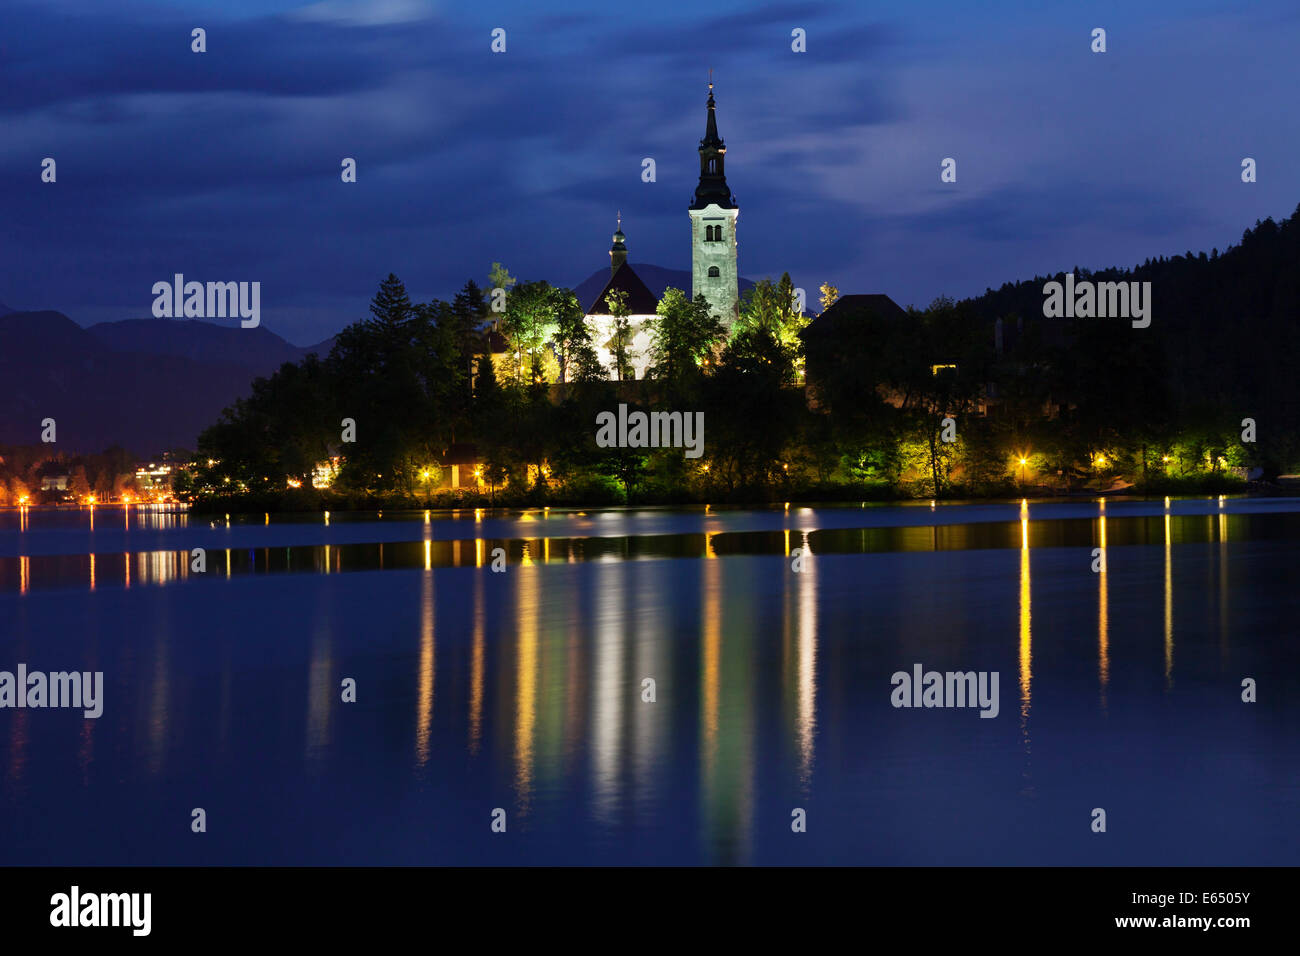 Bled island with St. Mary's Church, Lake Bled, Bled, Slovenia Stock Photo